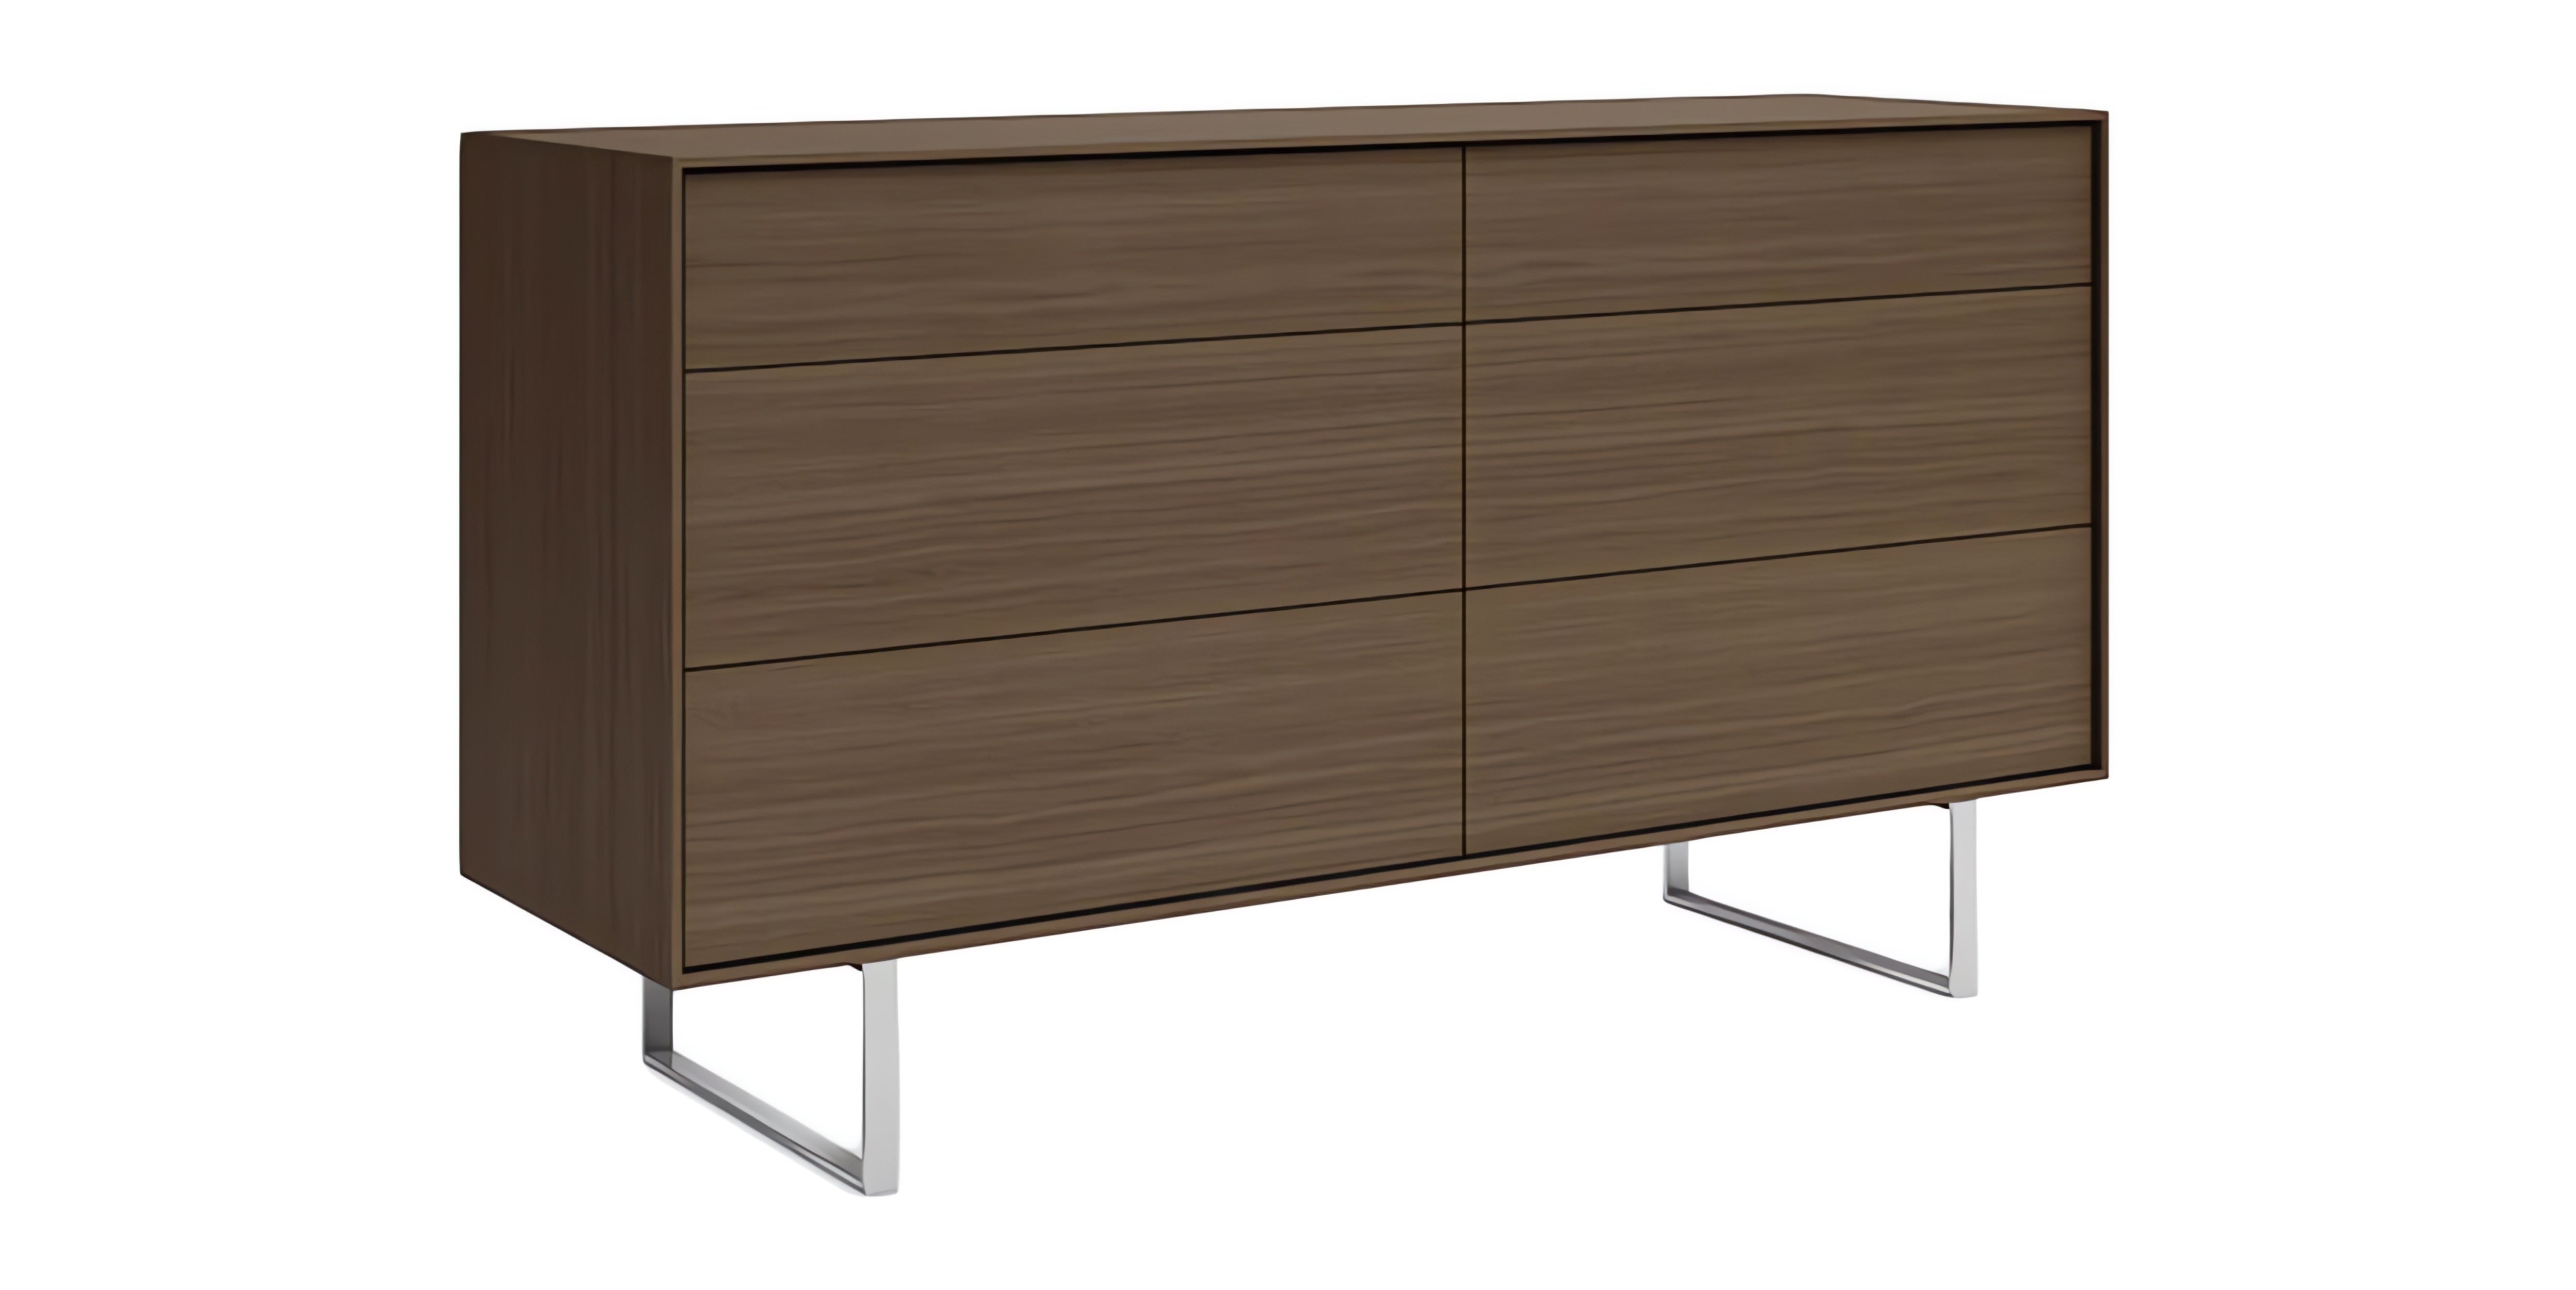 Praline on Walnut with Brushed Nickel Legs | Mobican Ophelia High Double Dresser | Valley Ridge Furniture